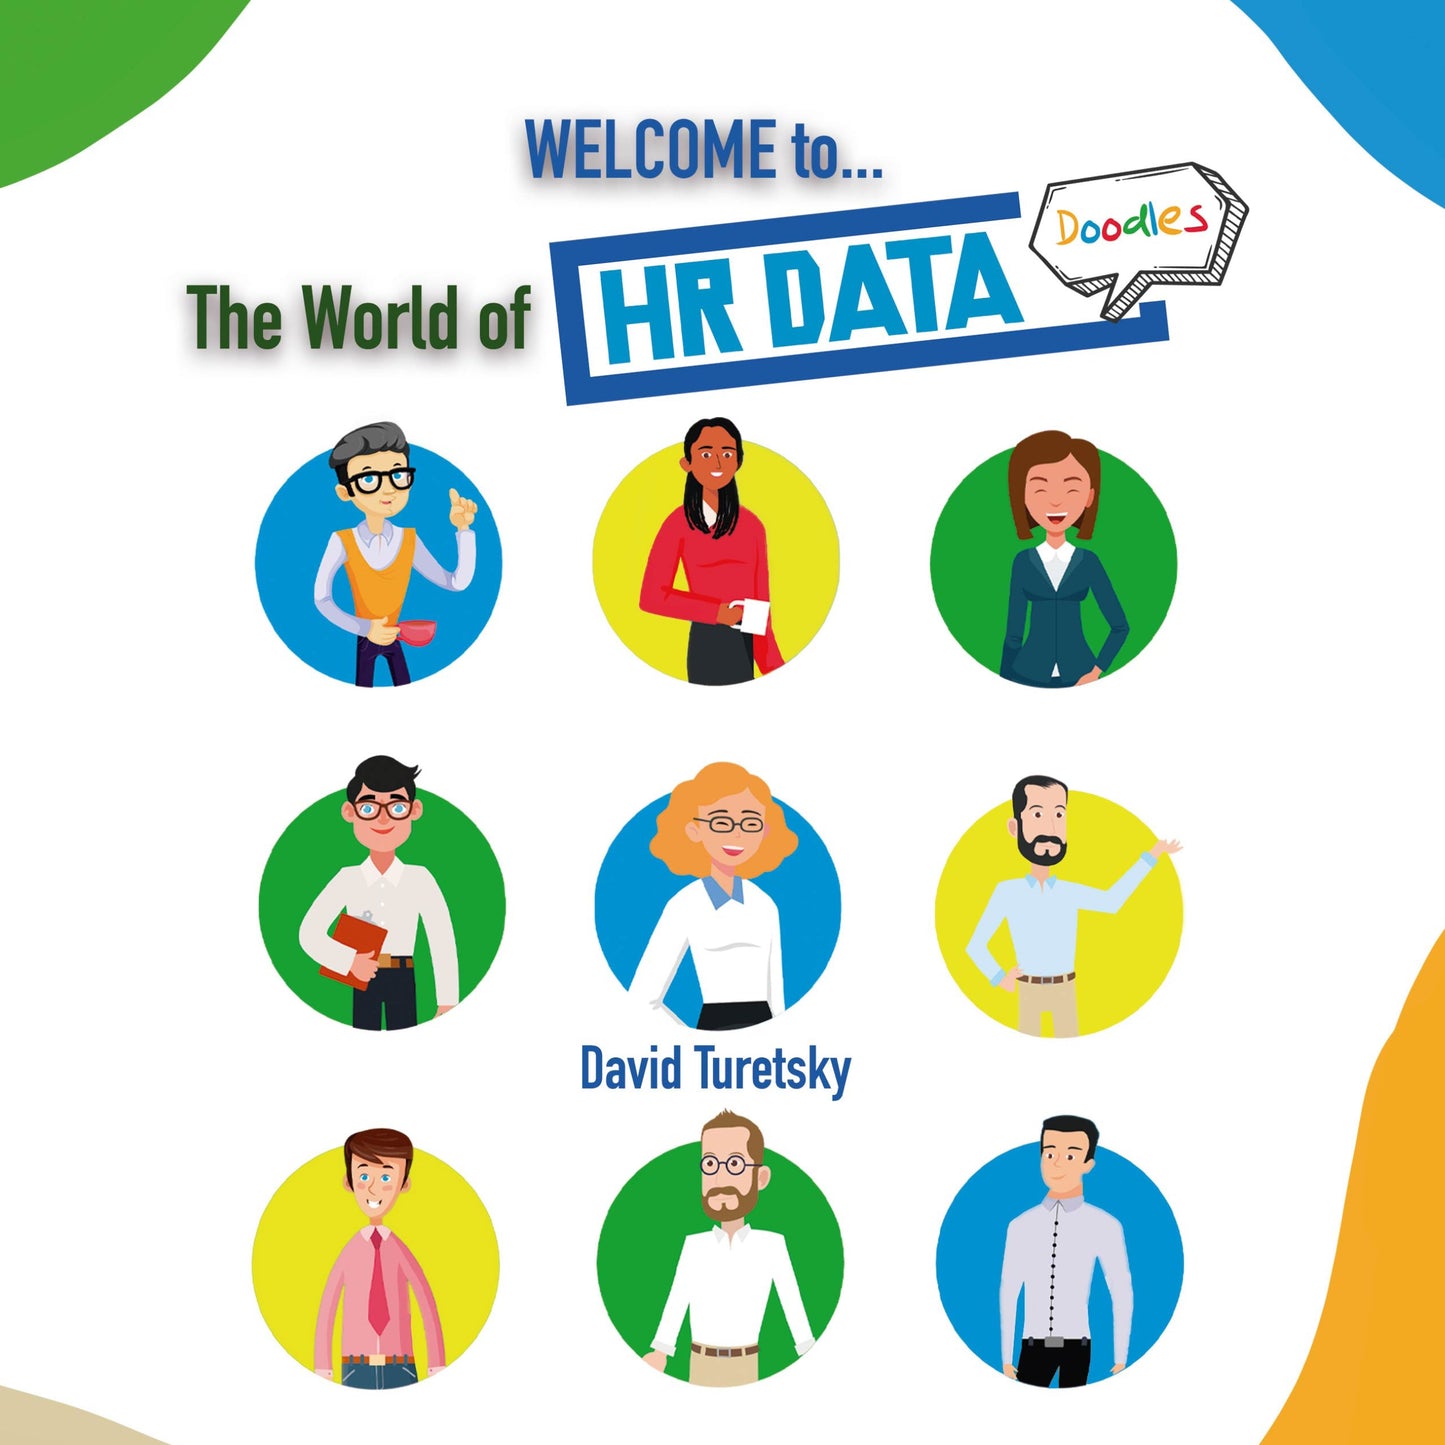 HR Data Doodles: Season 1 - Welcome to the World of HR Data Doodles